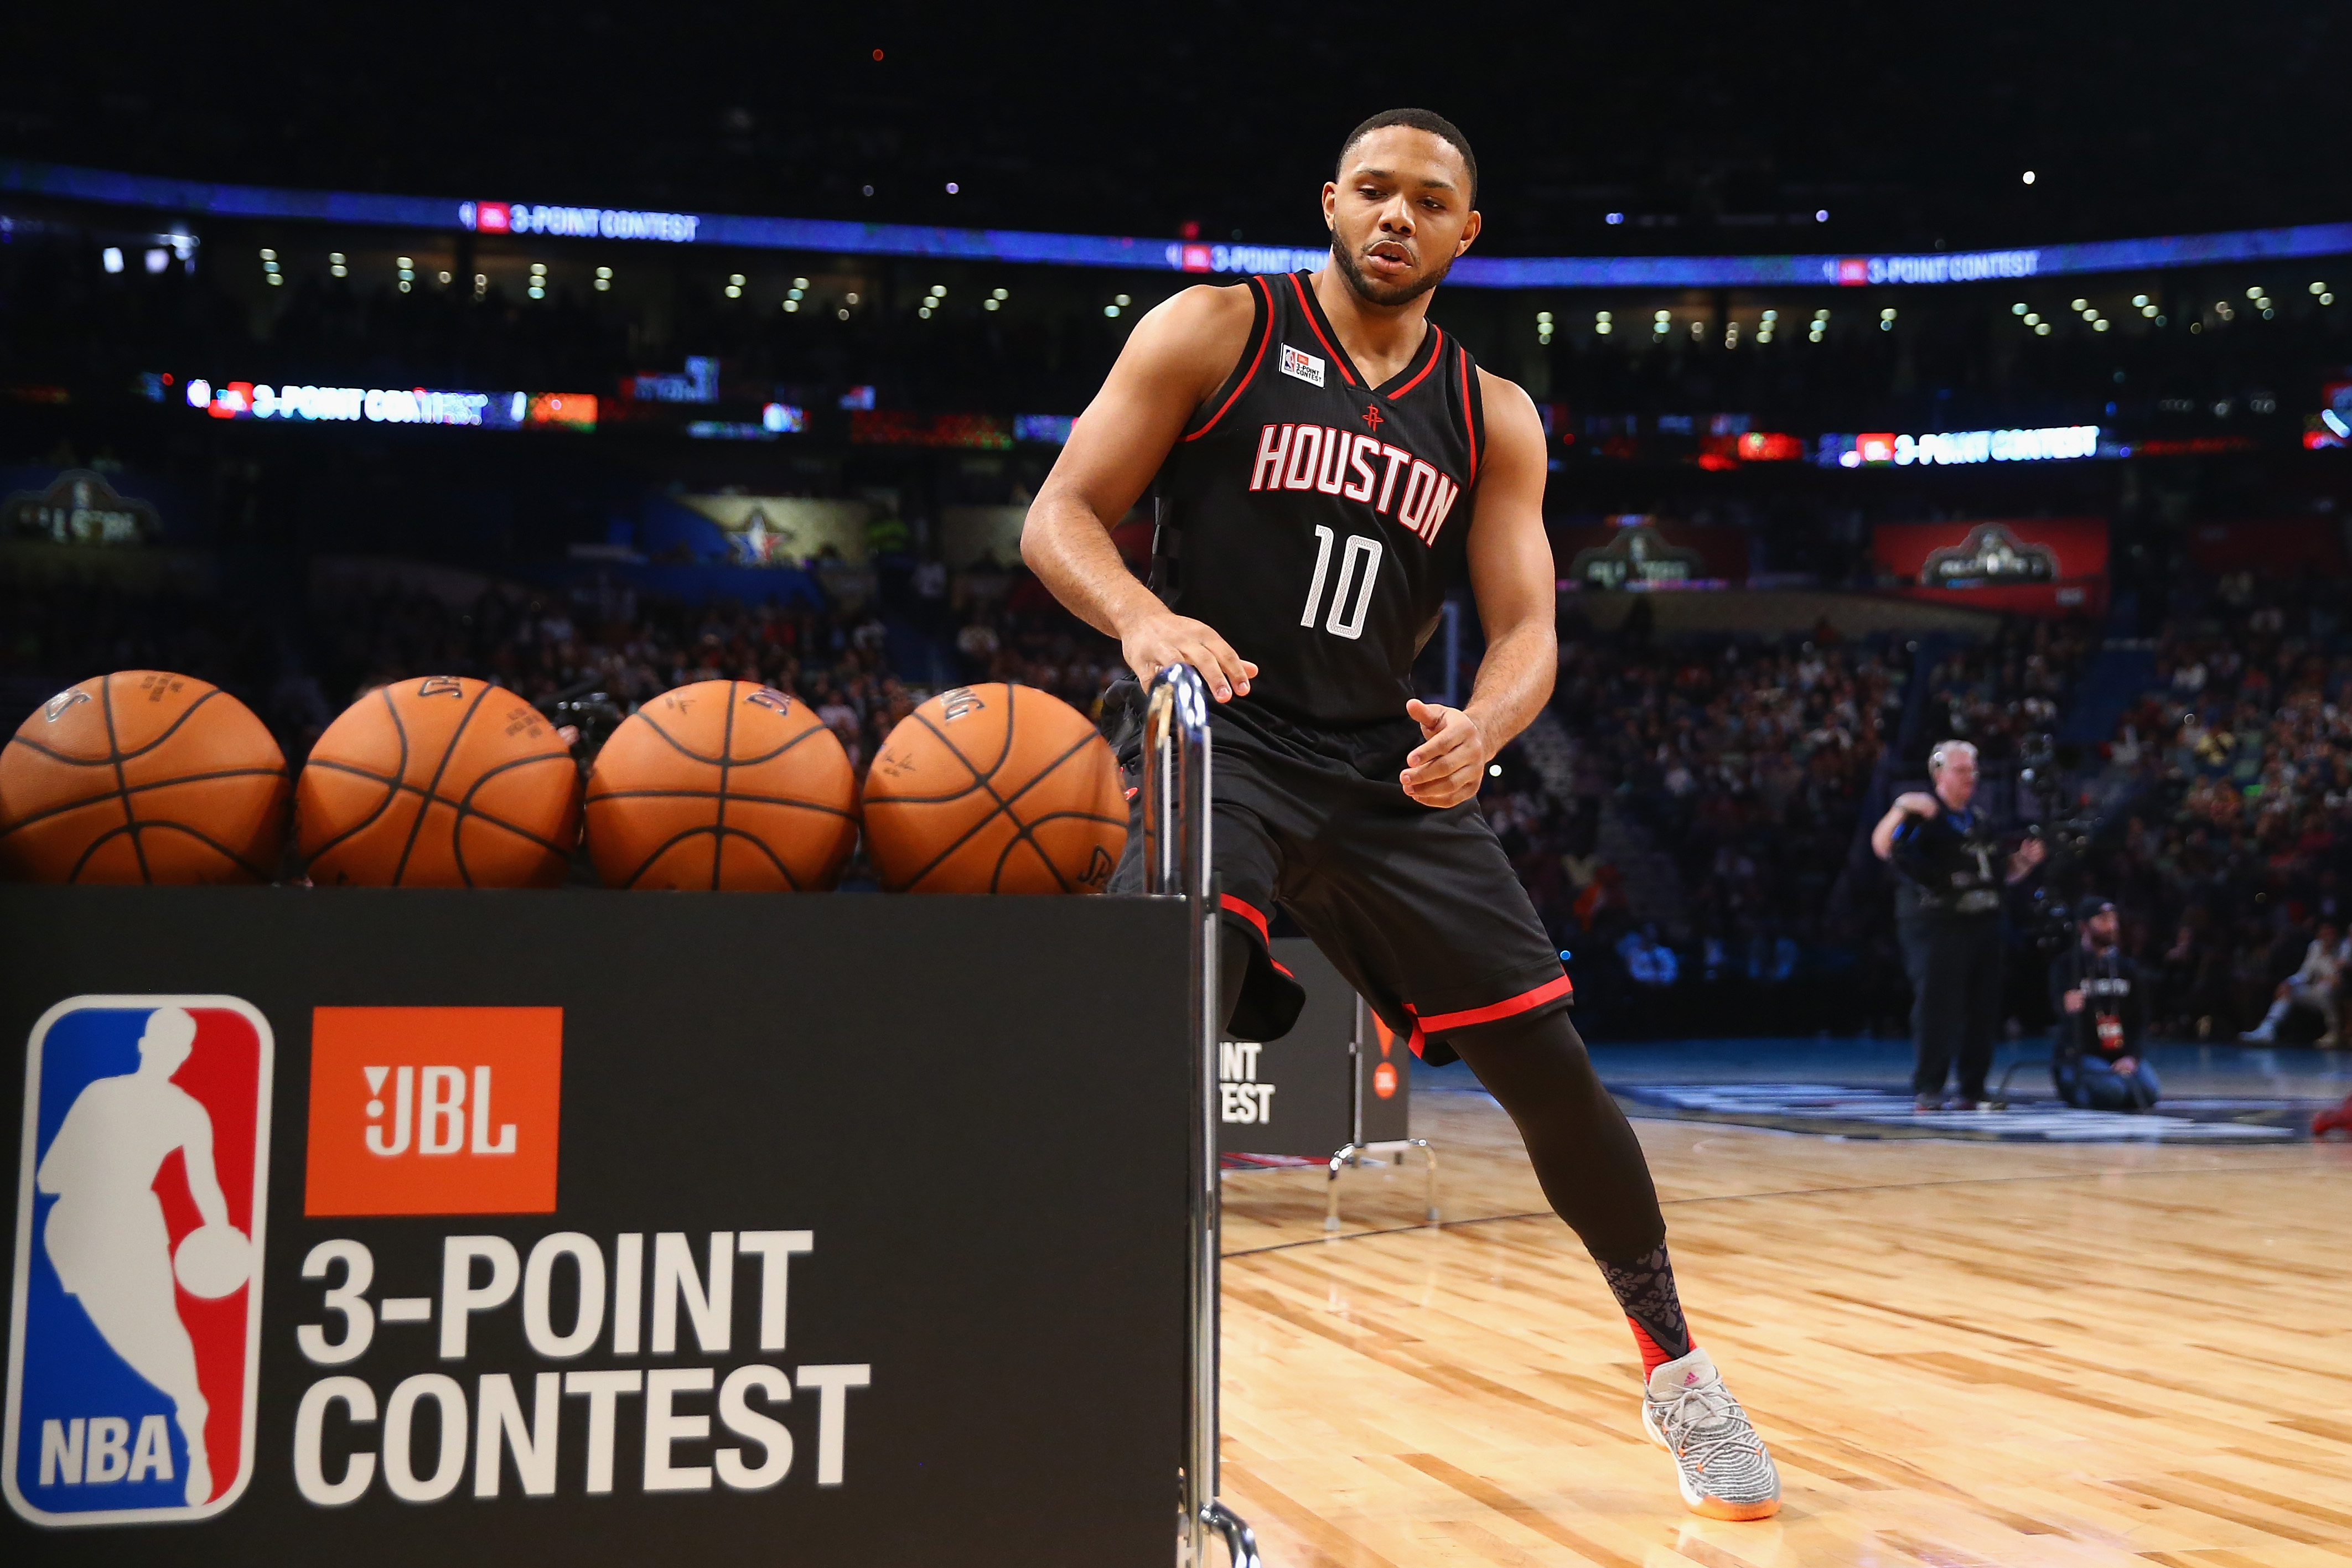 NBA's ThreePoint Contest Gets Cool Facelift Thanks To Some Imagination